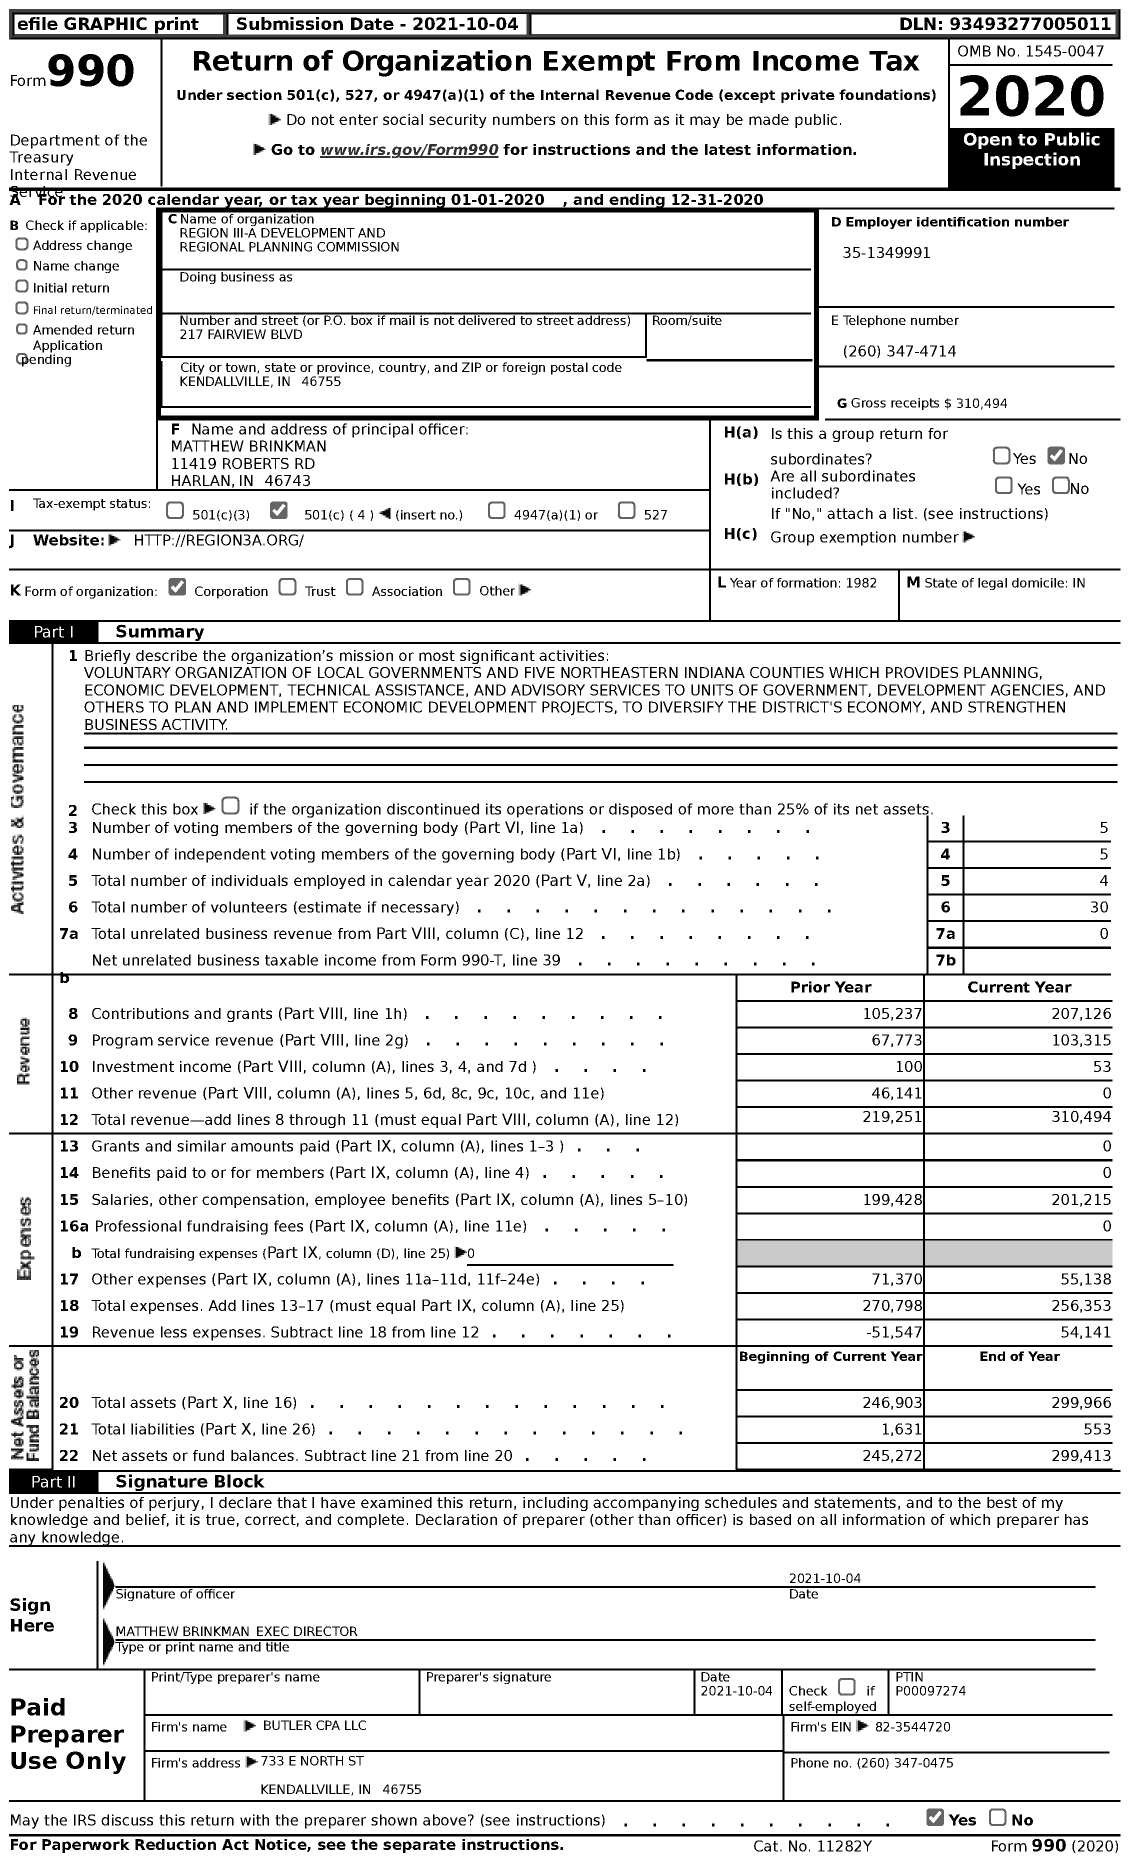 Image of first page of 2020 Form 990 for Region Iii-A Development and Regional Planning Commission